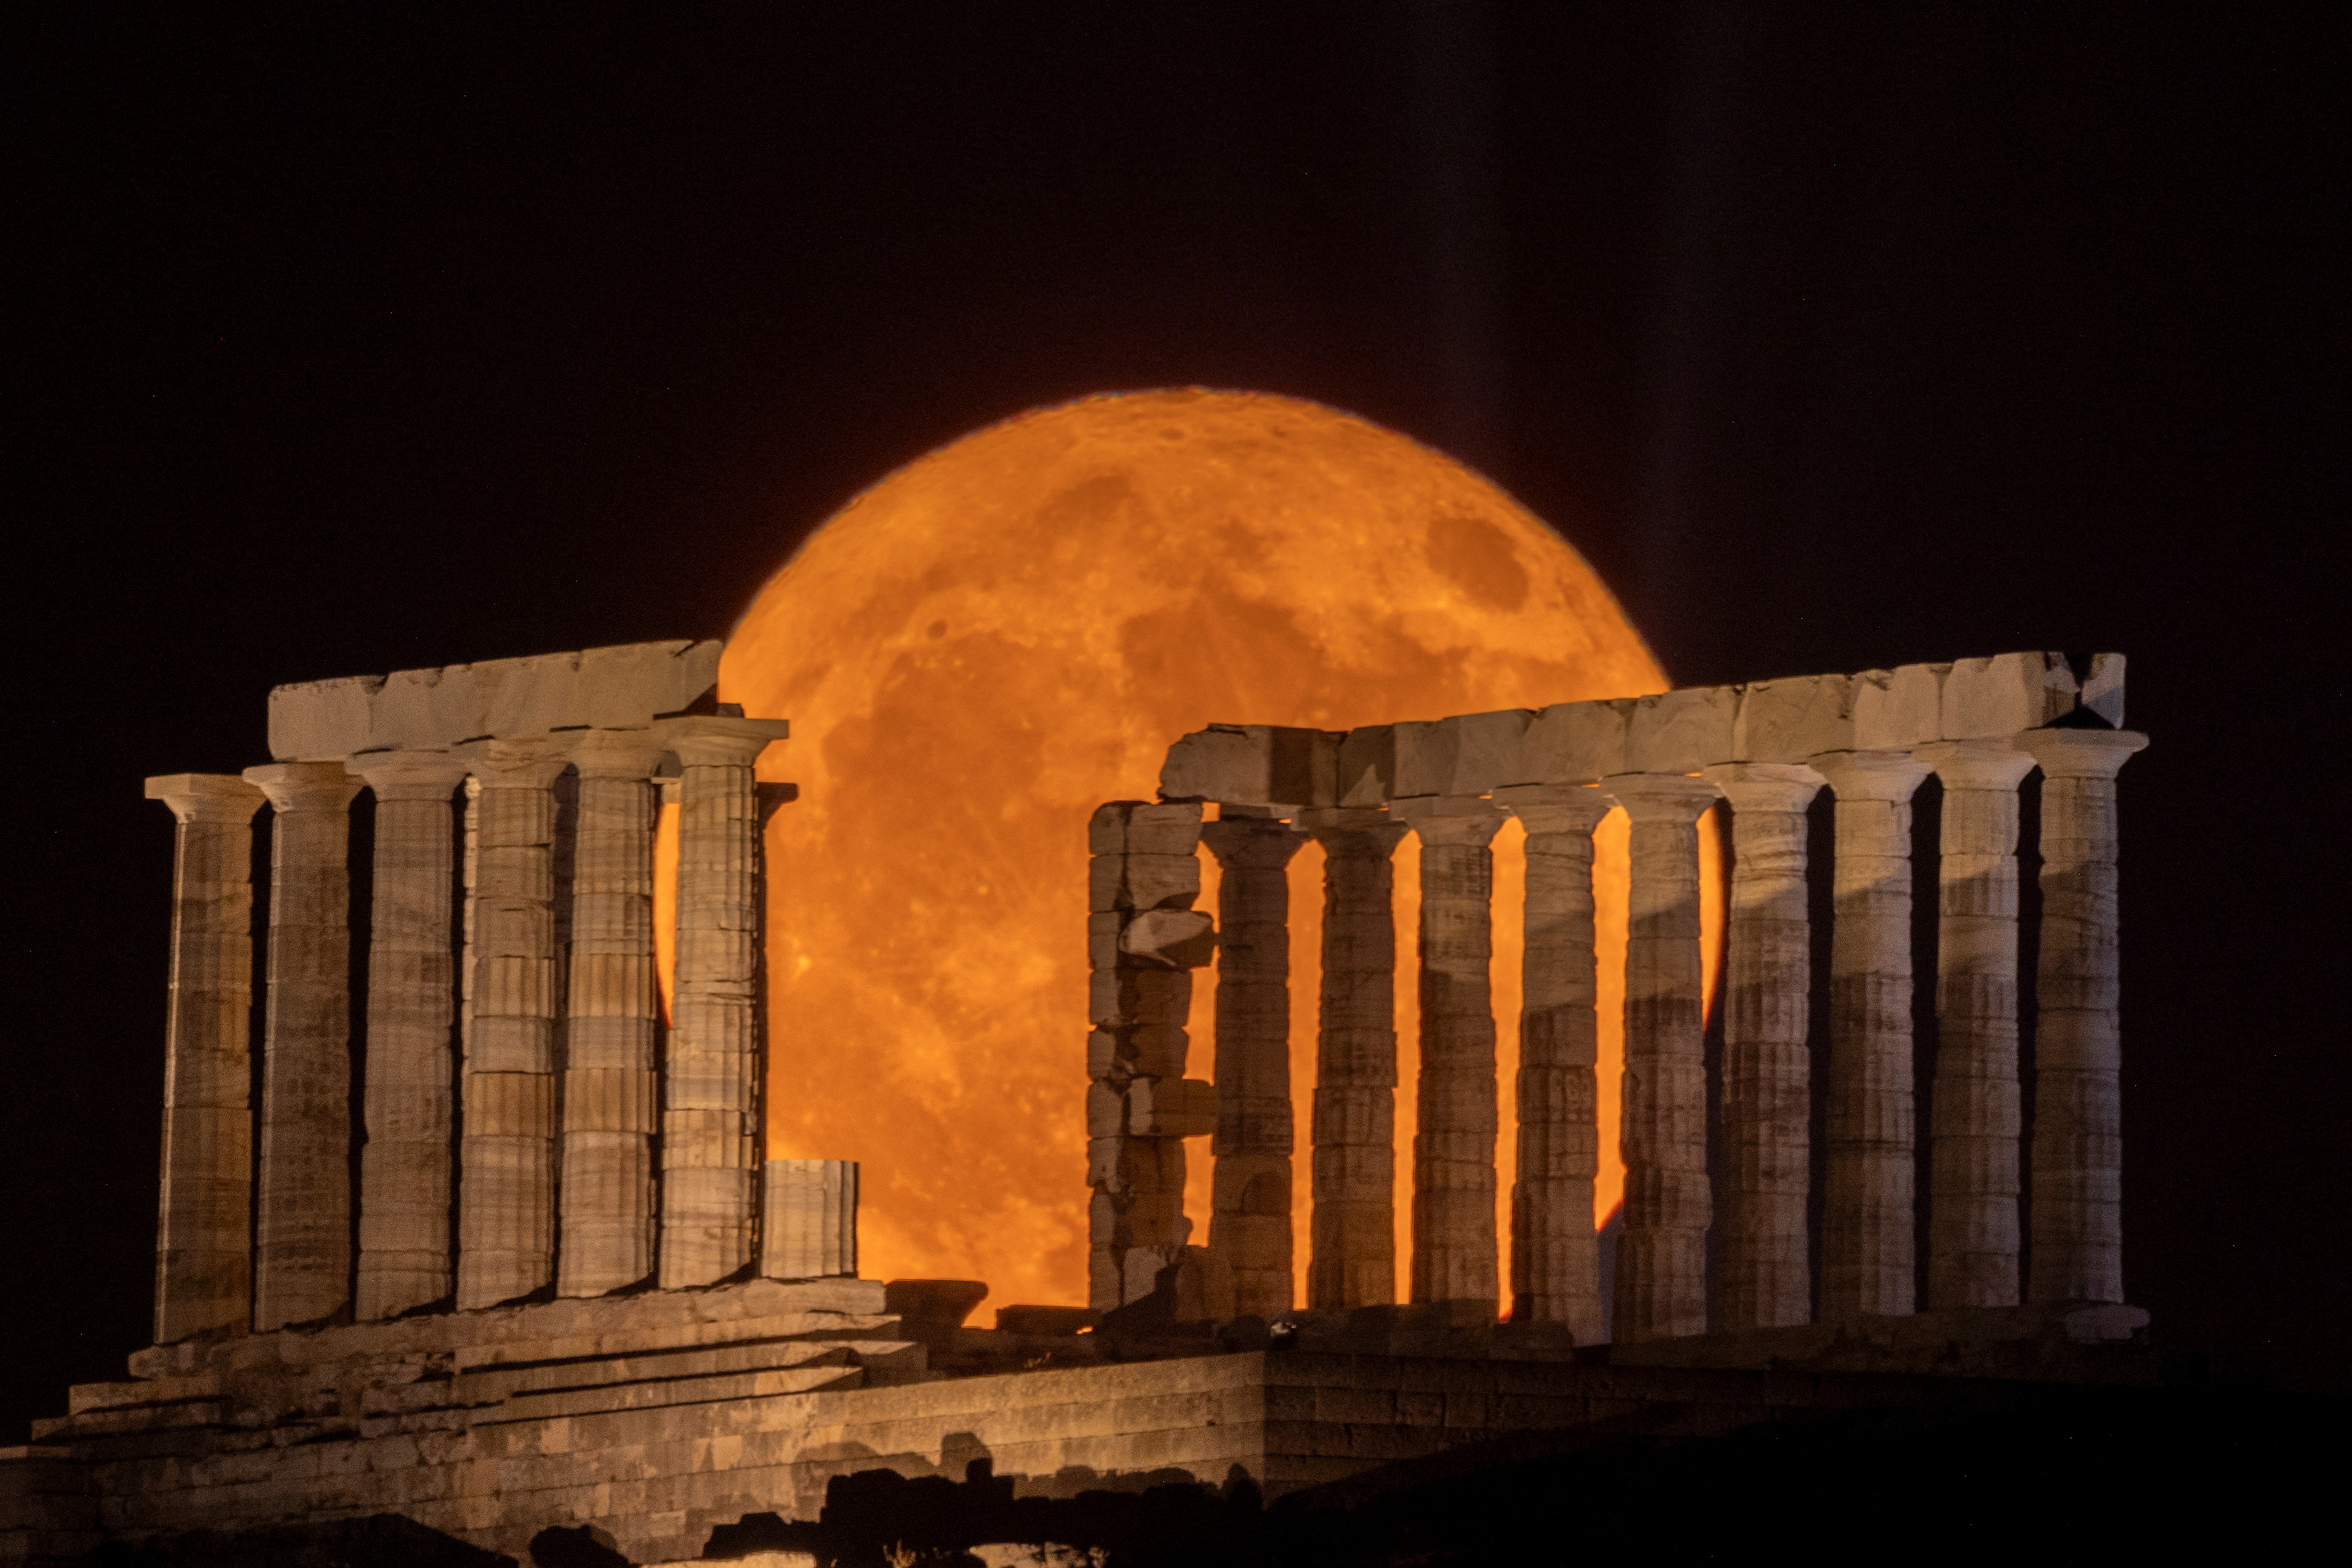 A huge orange moon rises behind a ruined Grecian temple with two rows of damaged stone columns.